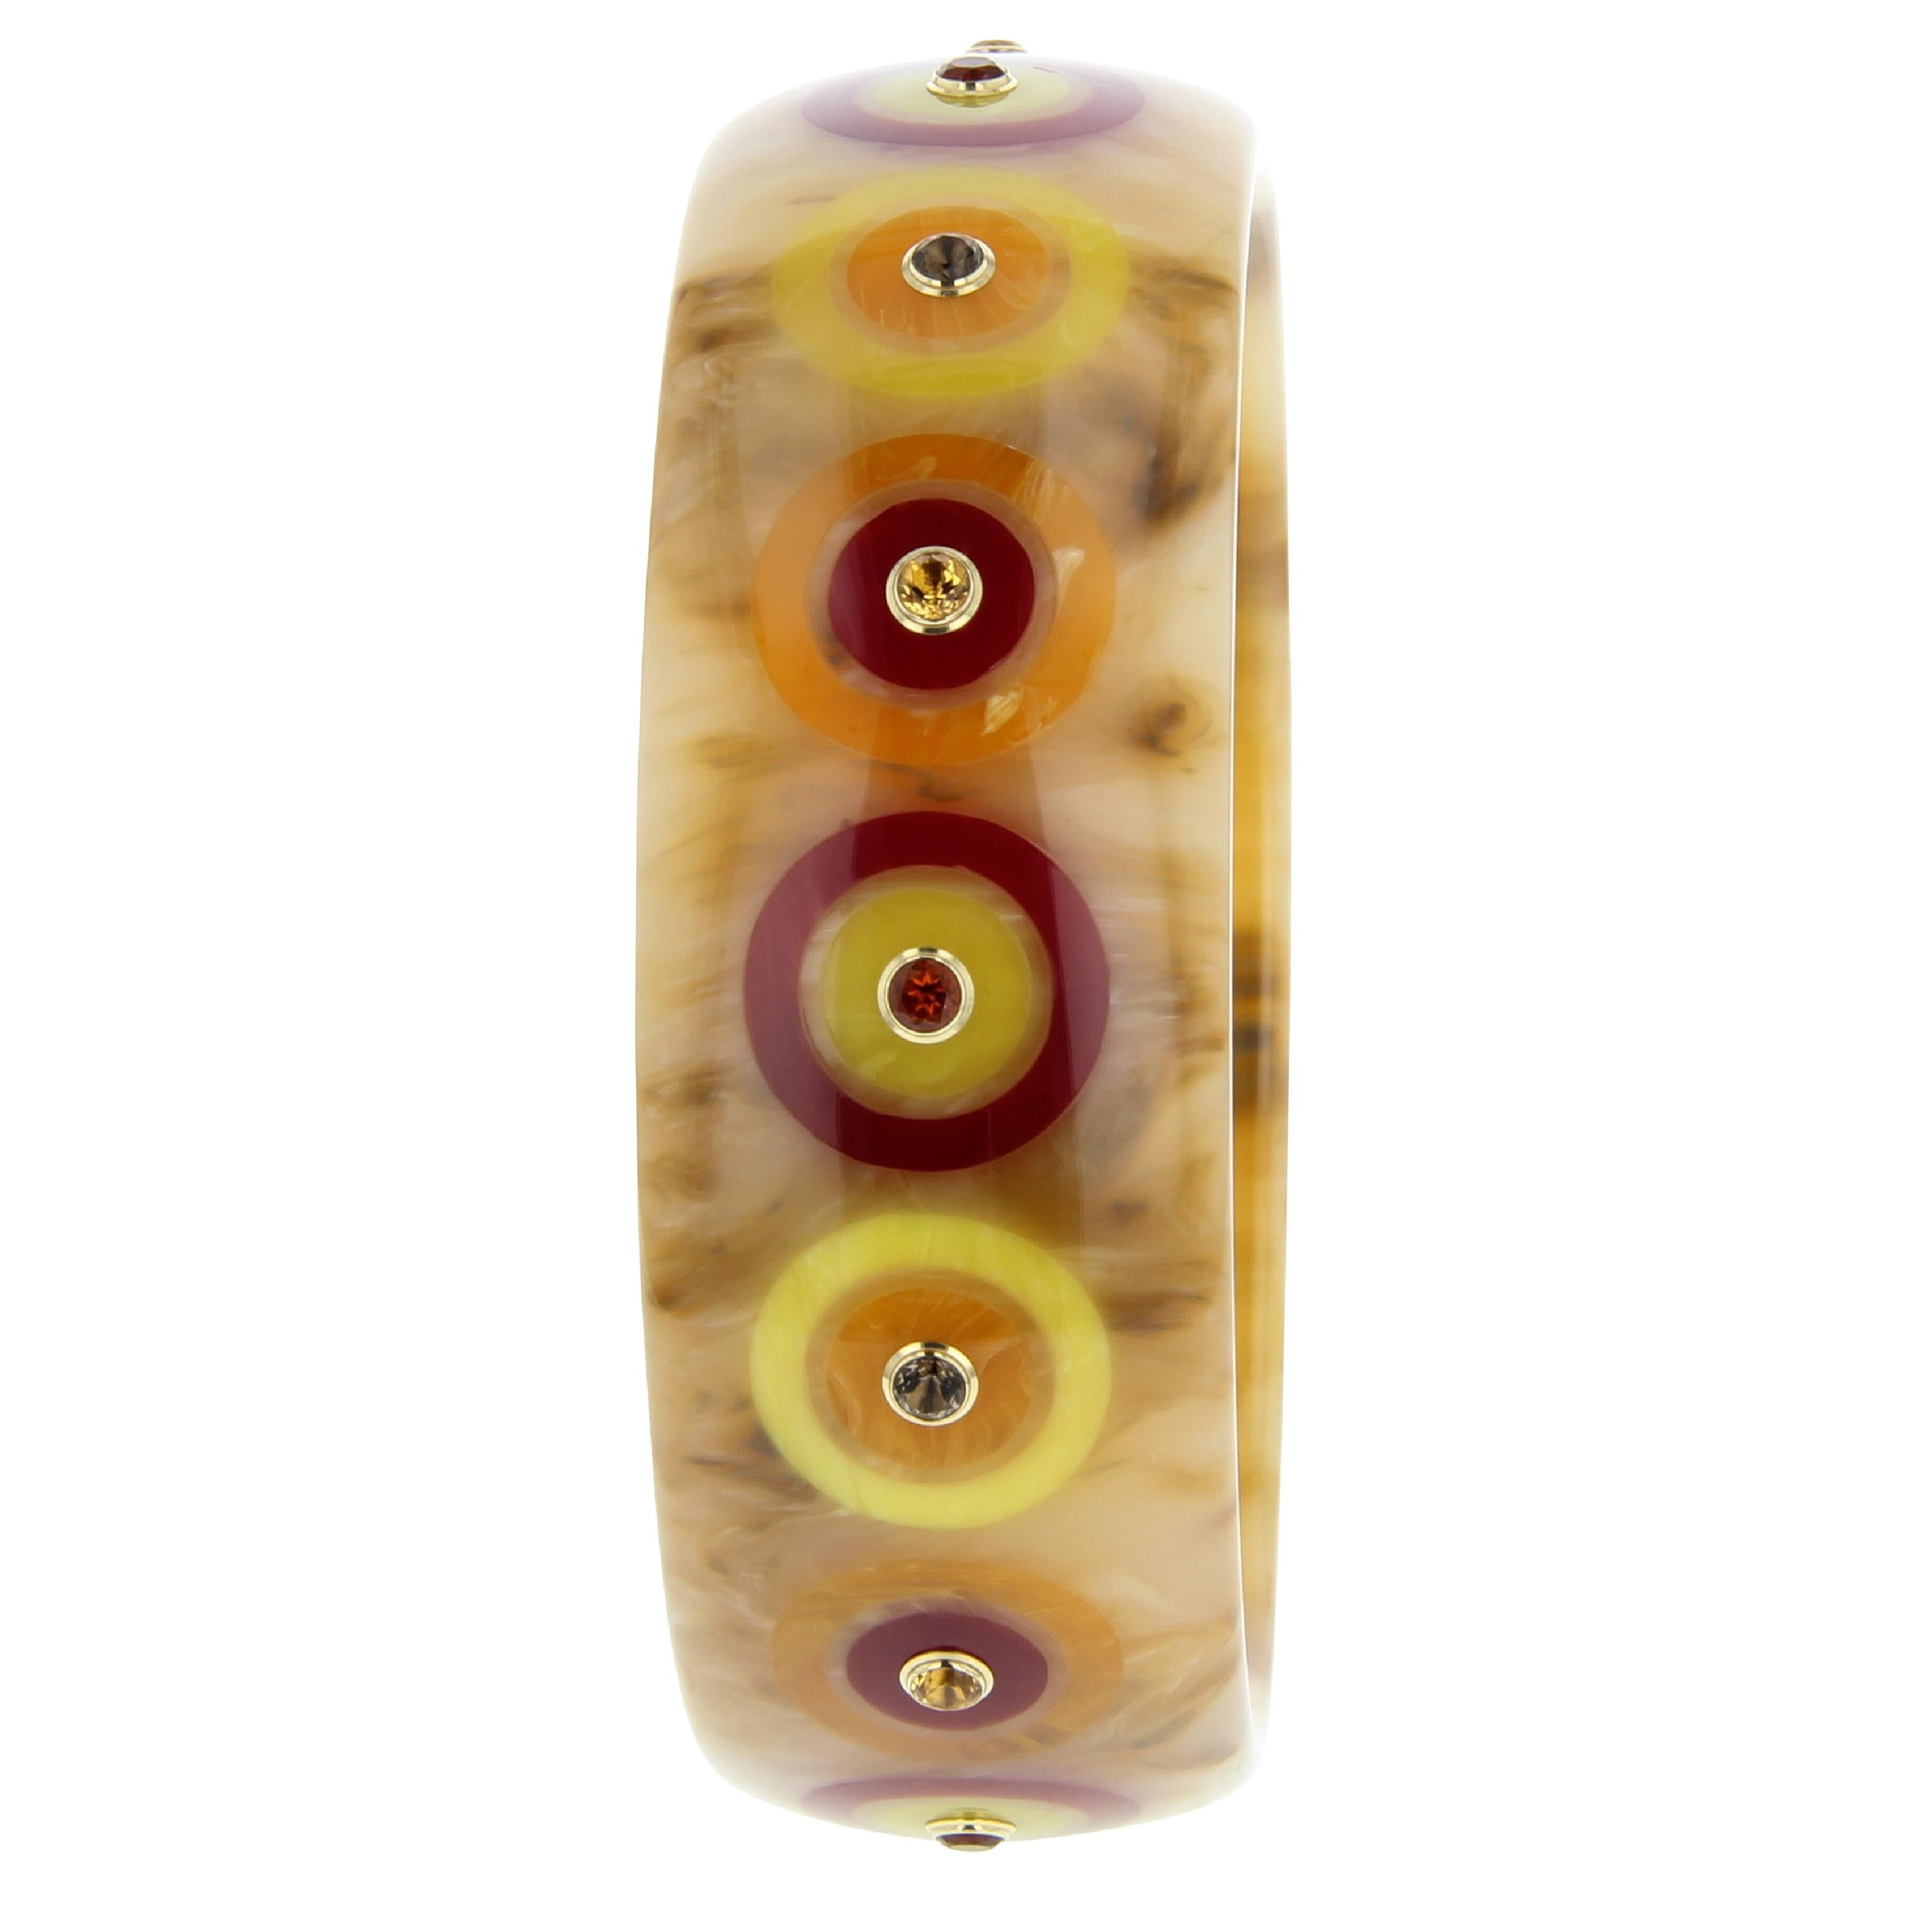 This bullseye patterned Mark Davis bangle was handcrafted using a classic, marbled, brown, vintage bakelite set with bullseyes created with burgundy, yellow and orange bakelite inlay. Each bullseye is centered with a light or dark citrine or smoky